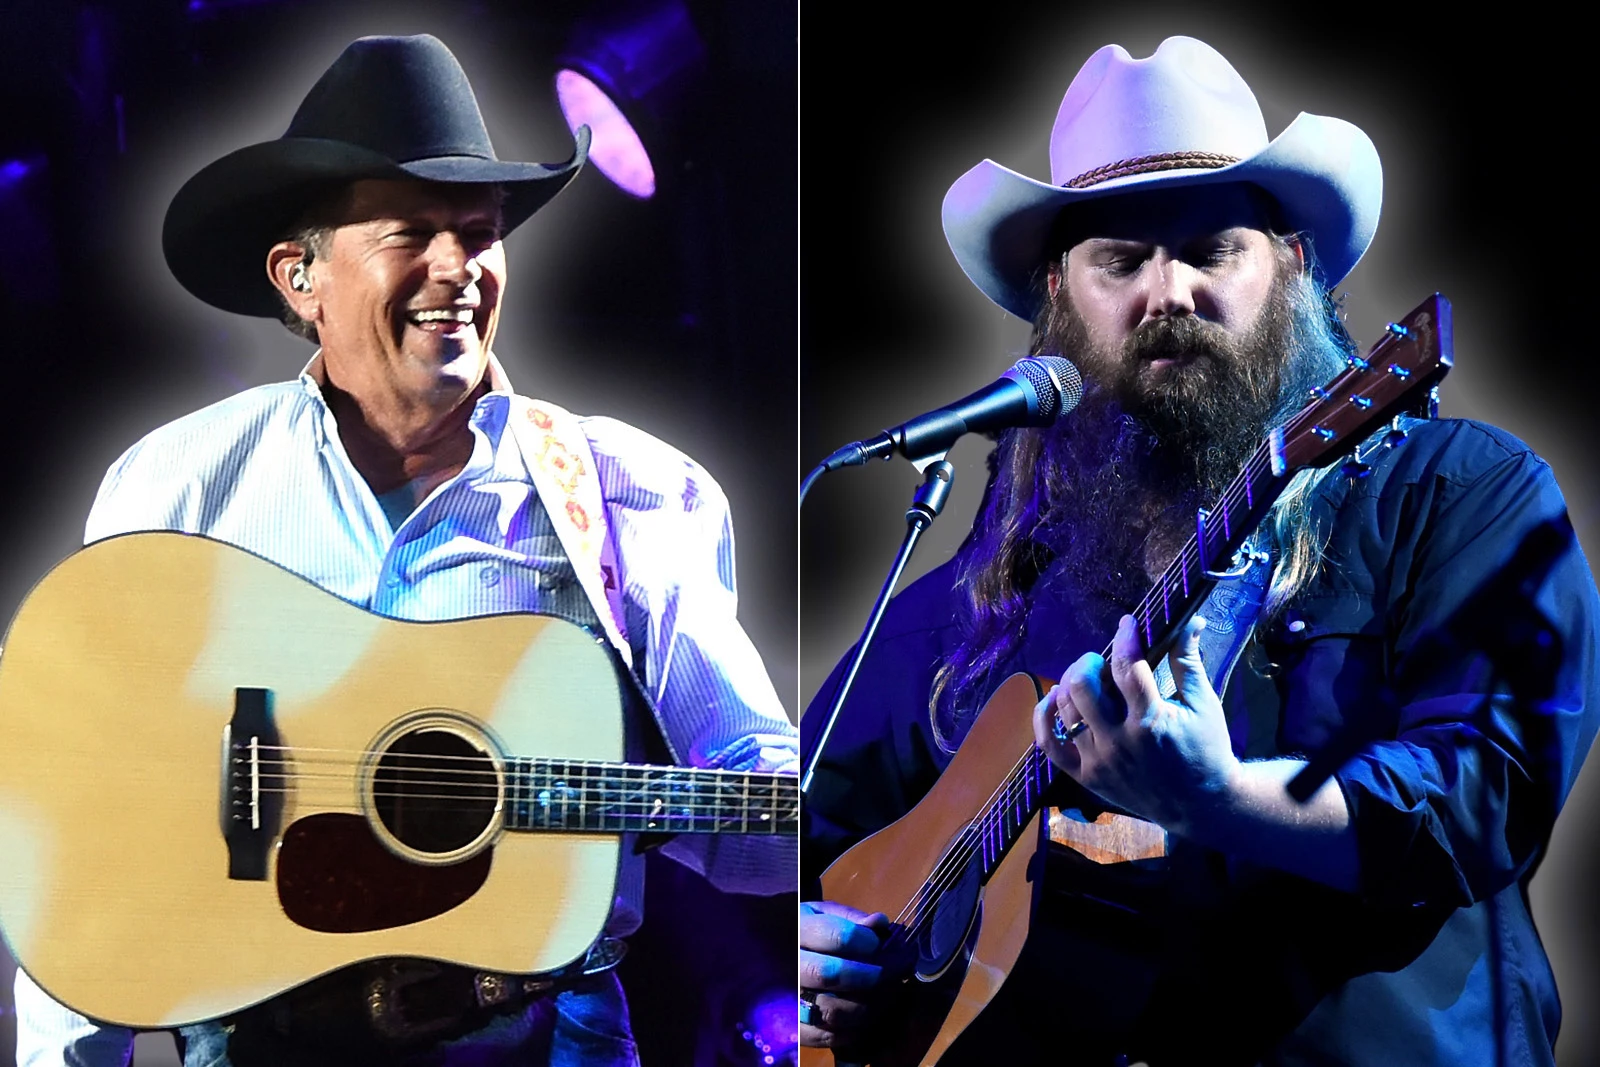 The New George Strait, Chris Stapleton Duet Is Here [Watch]